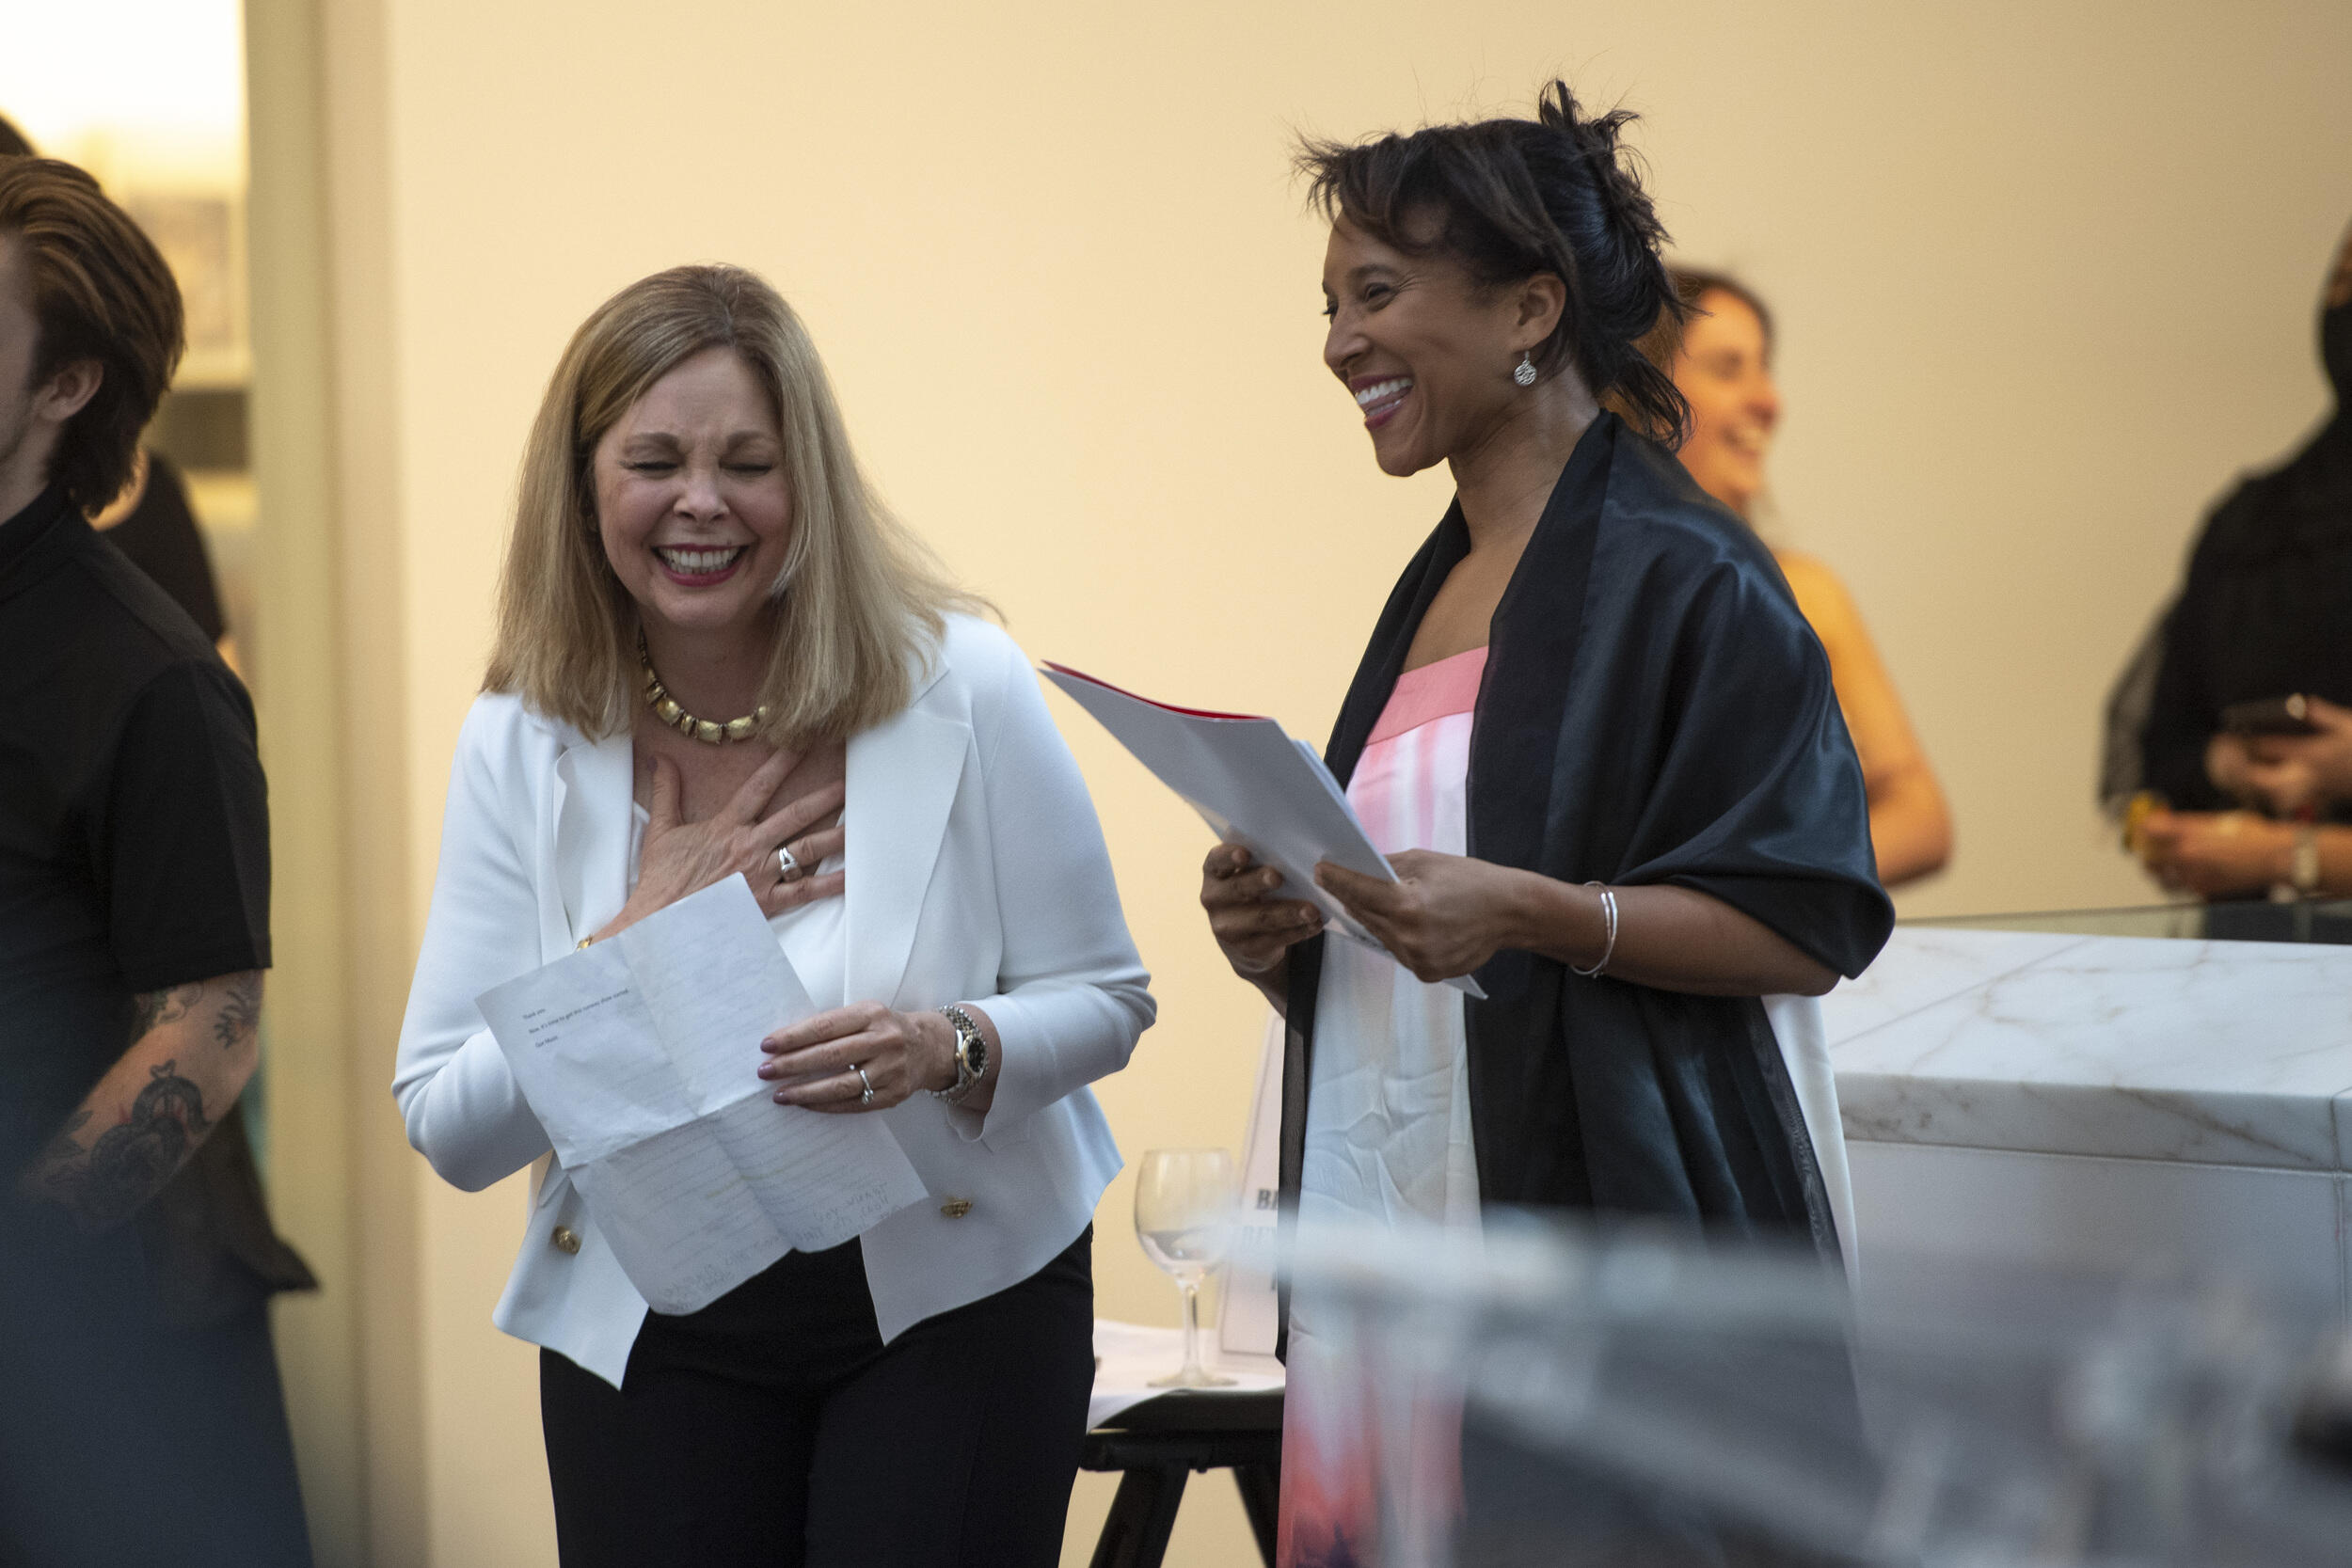 Left to right: Deidra Arrington and Carmenita Higginbotham holding each other and holding papers while laughing 